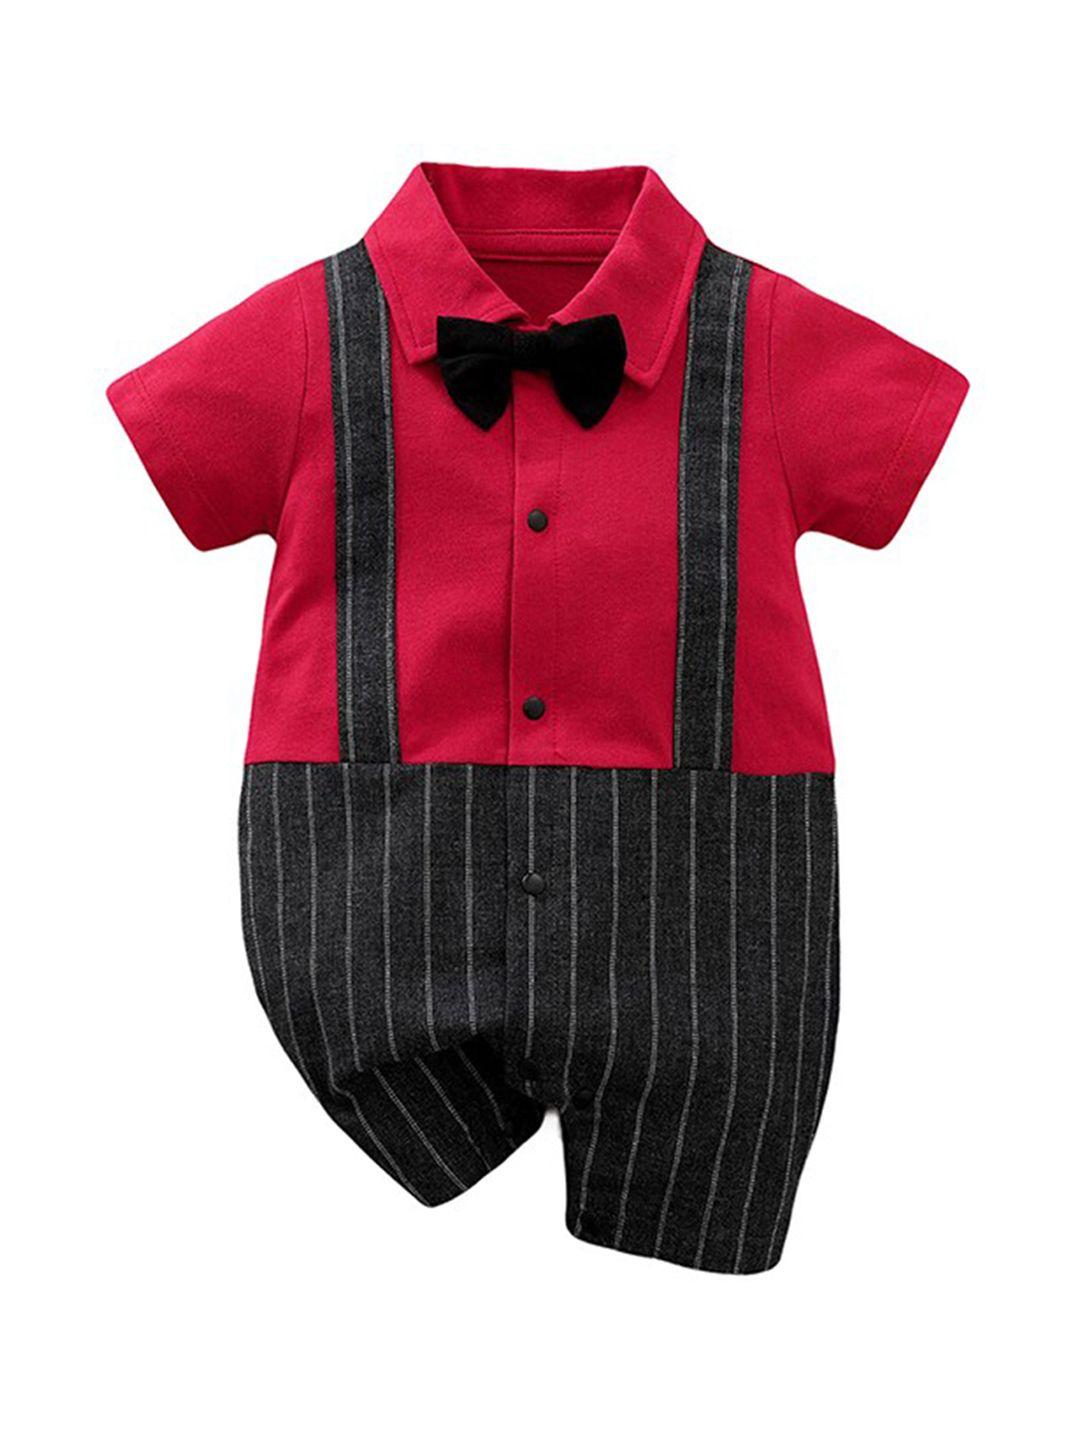 stylecast infant boys red & black striped pure cotton rompers